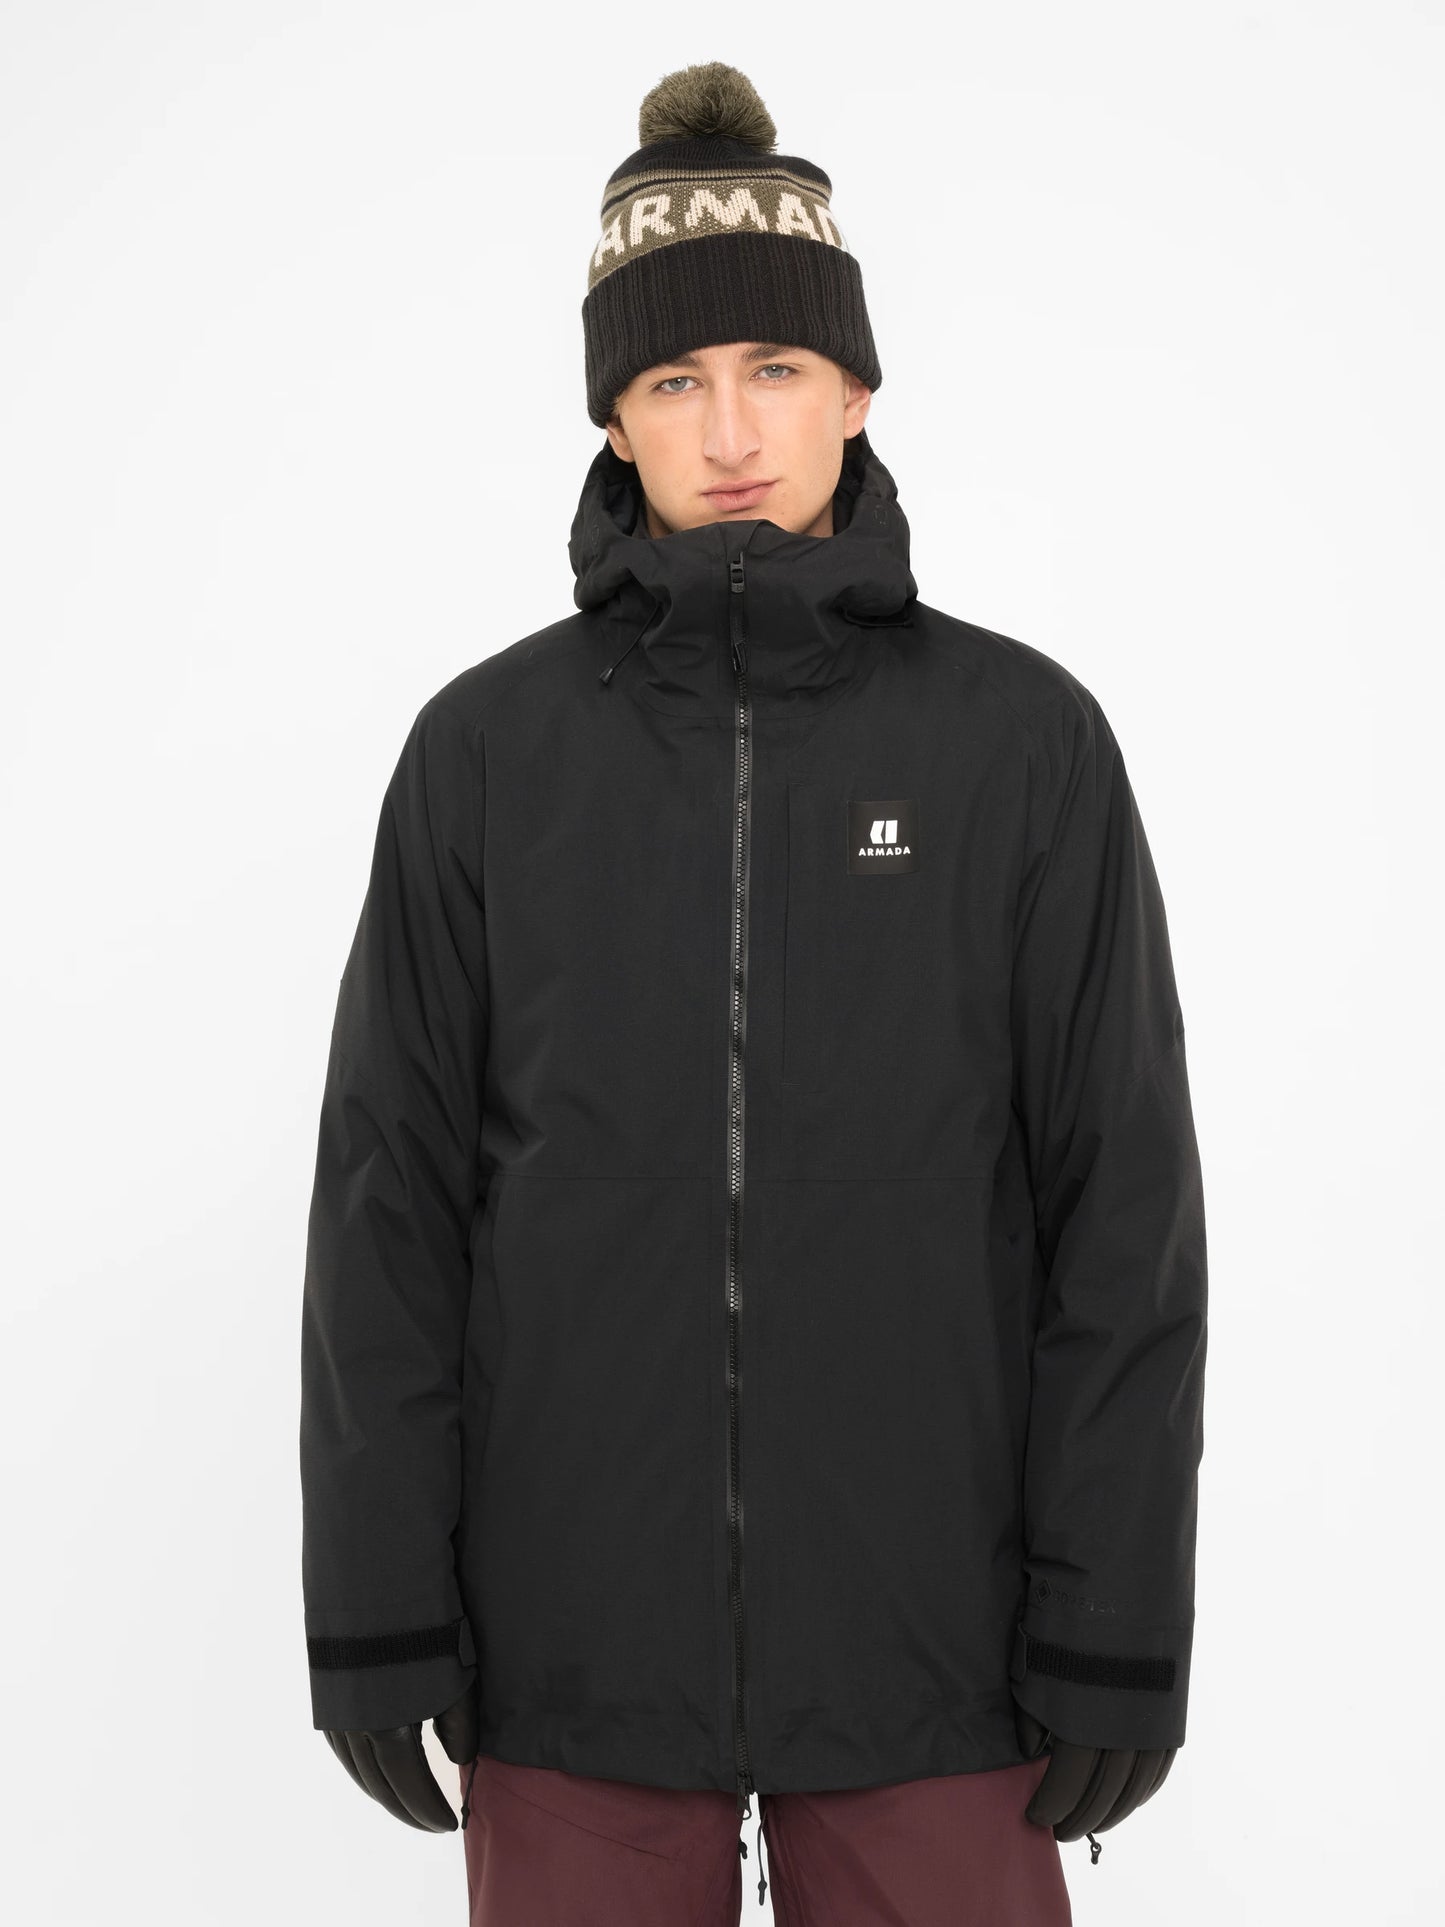 Romer 2L GORE-TEX Insulated Jacket